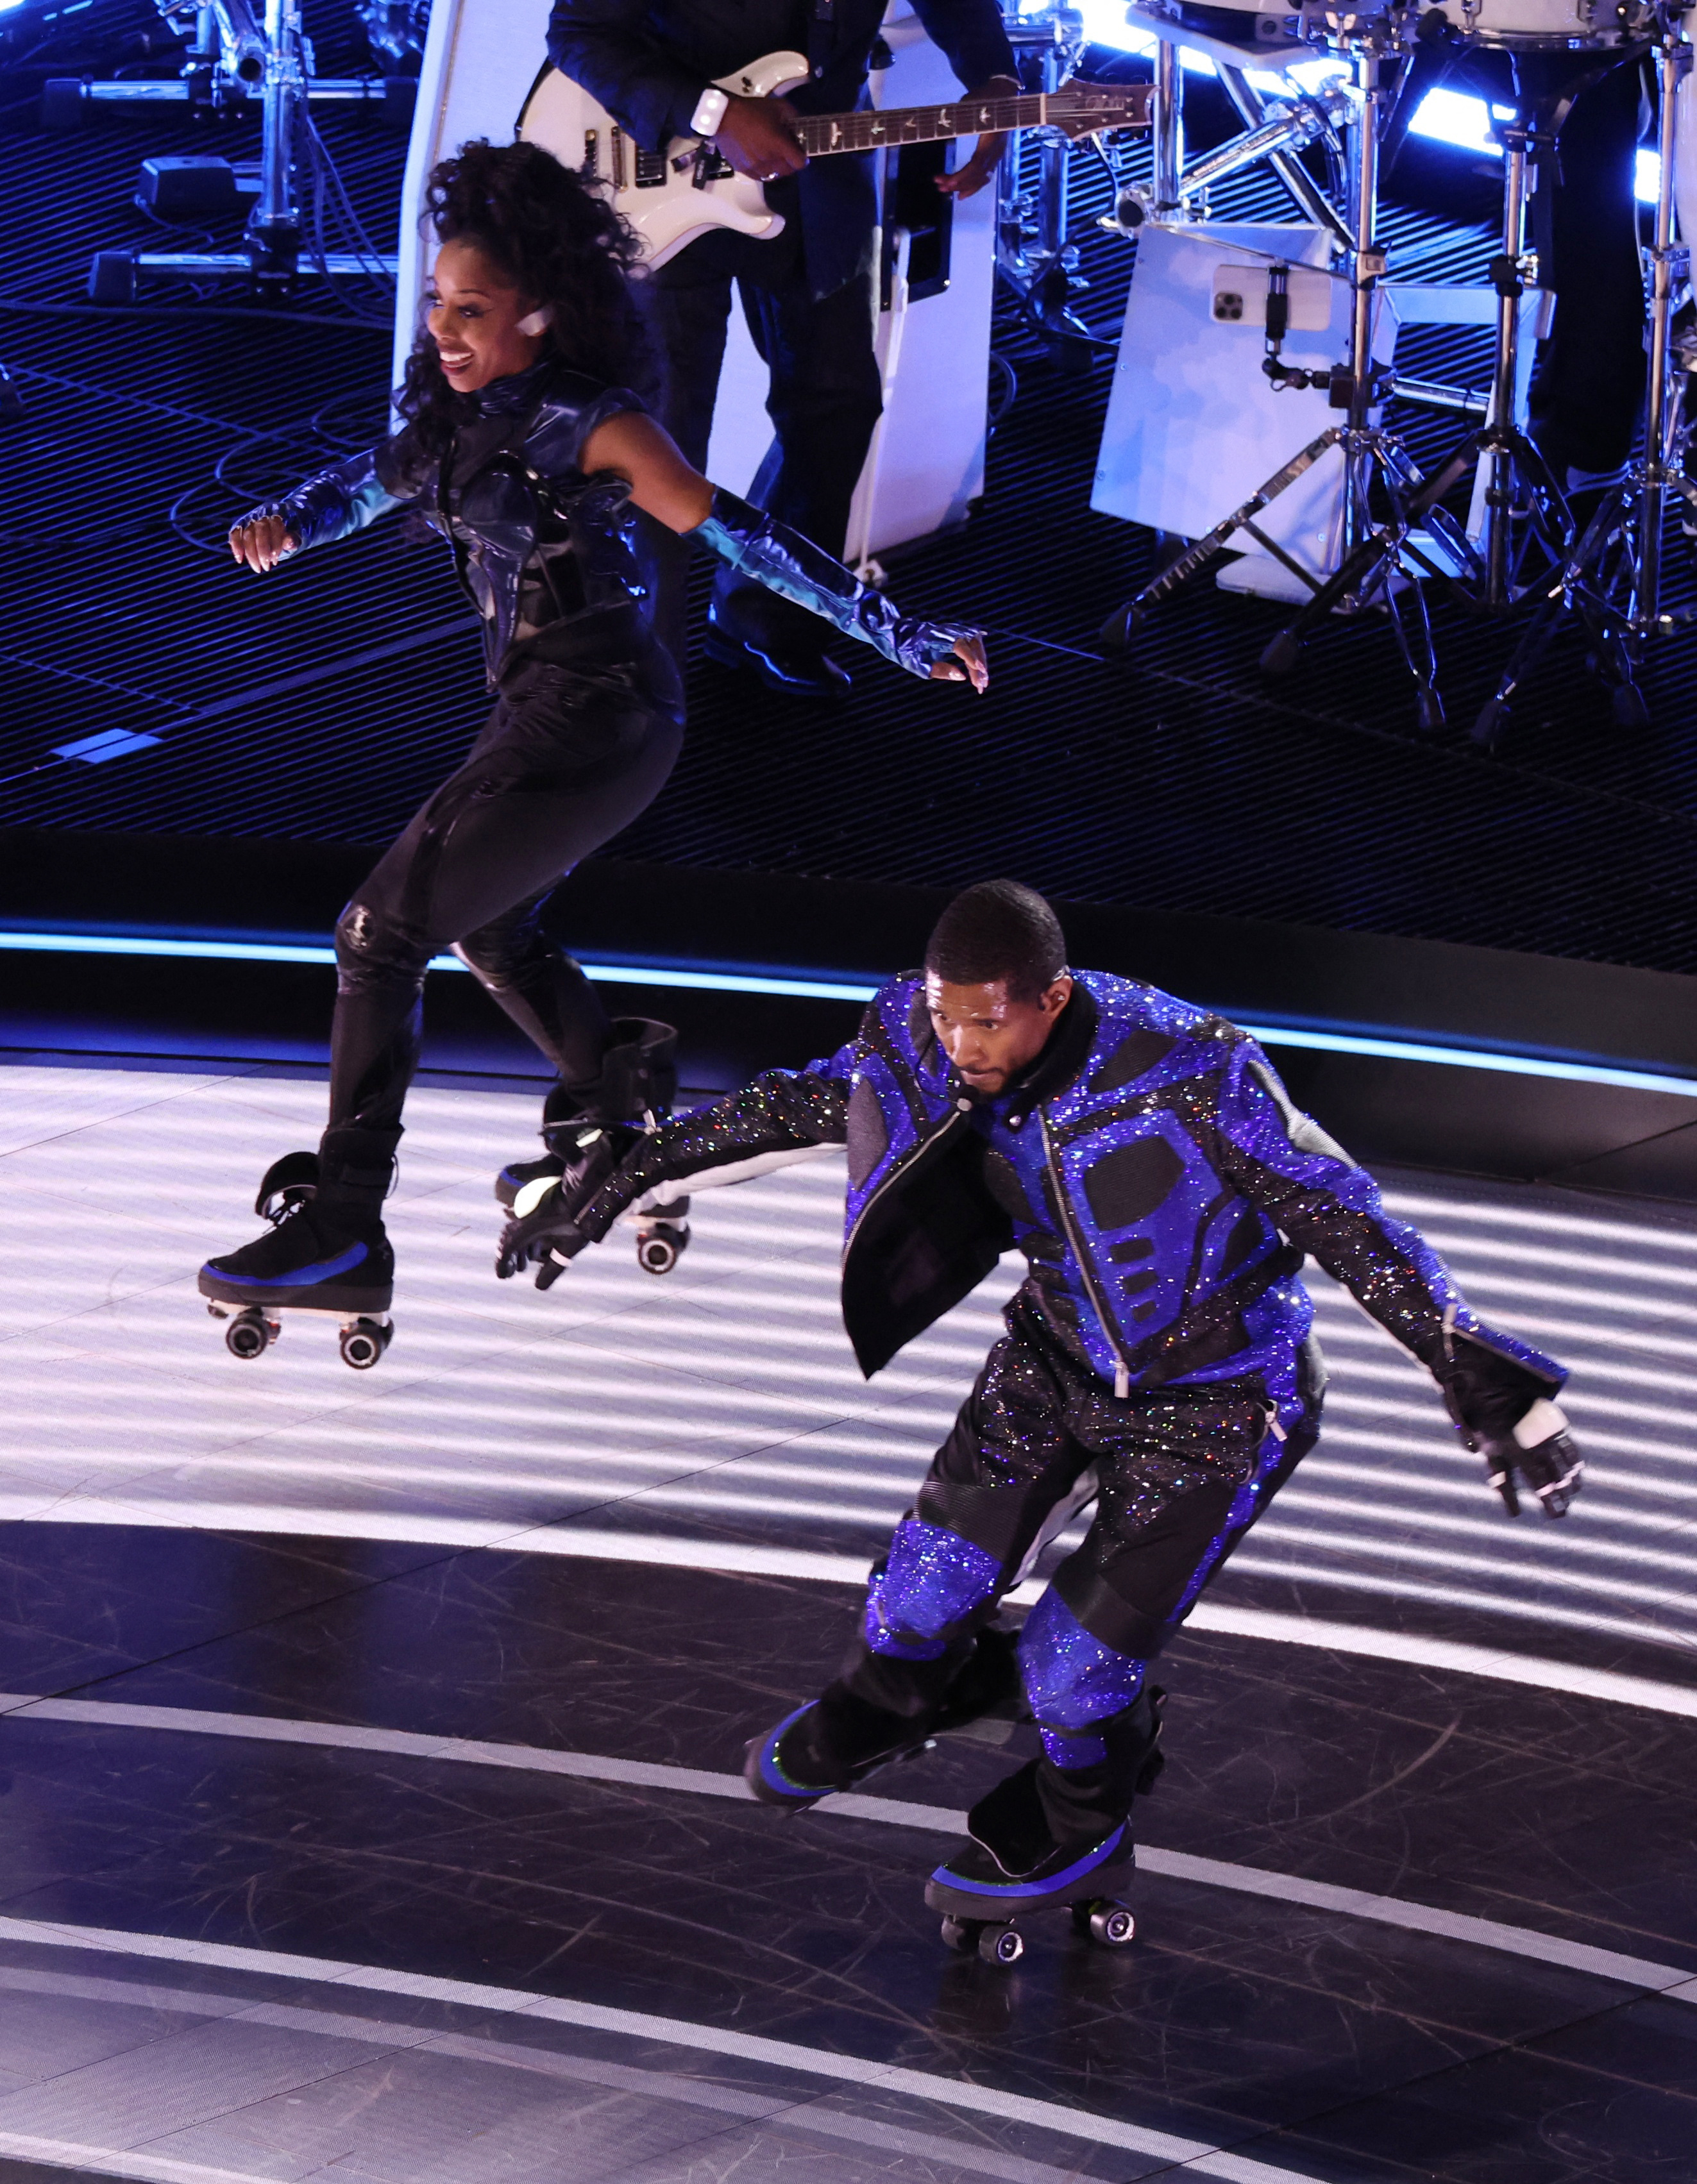 Fans caught a moment where Usher almost fell while riding on roller skates